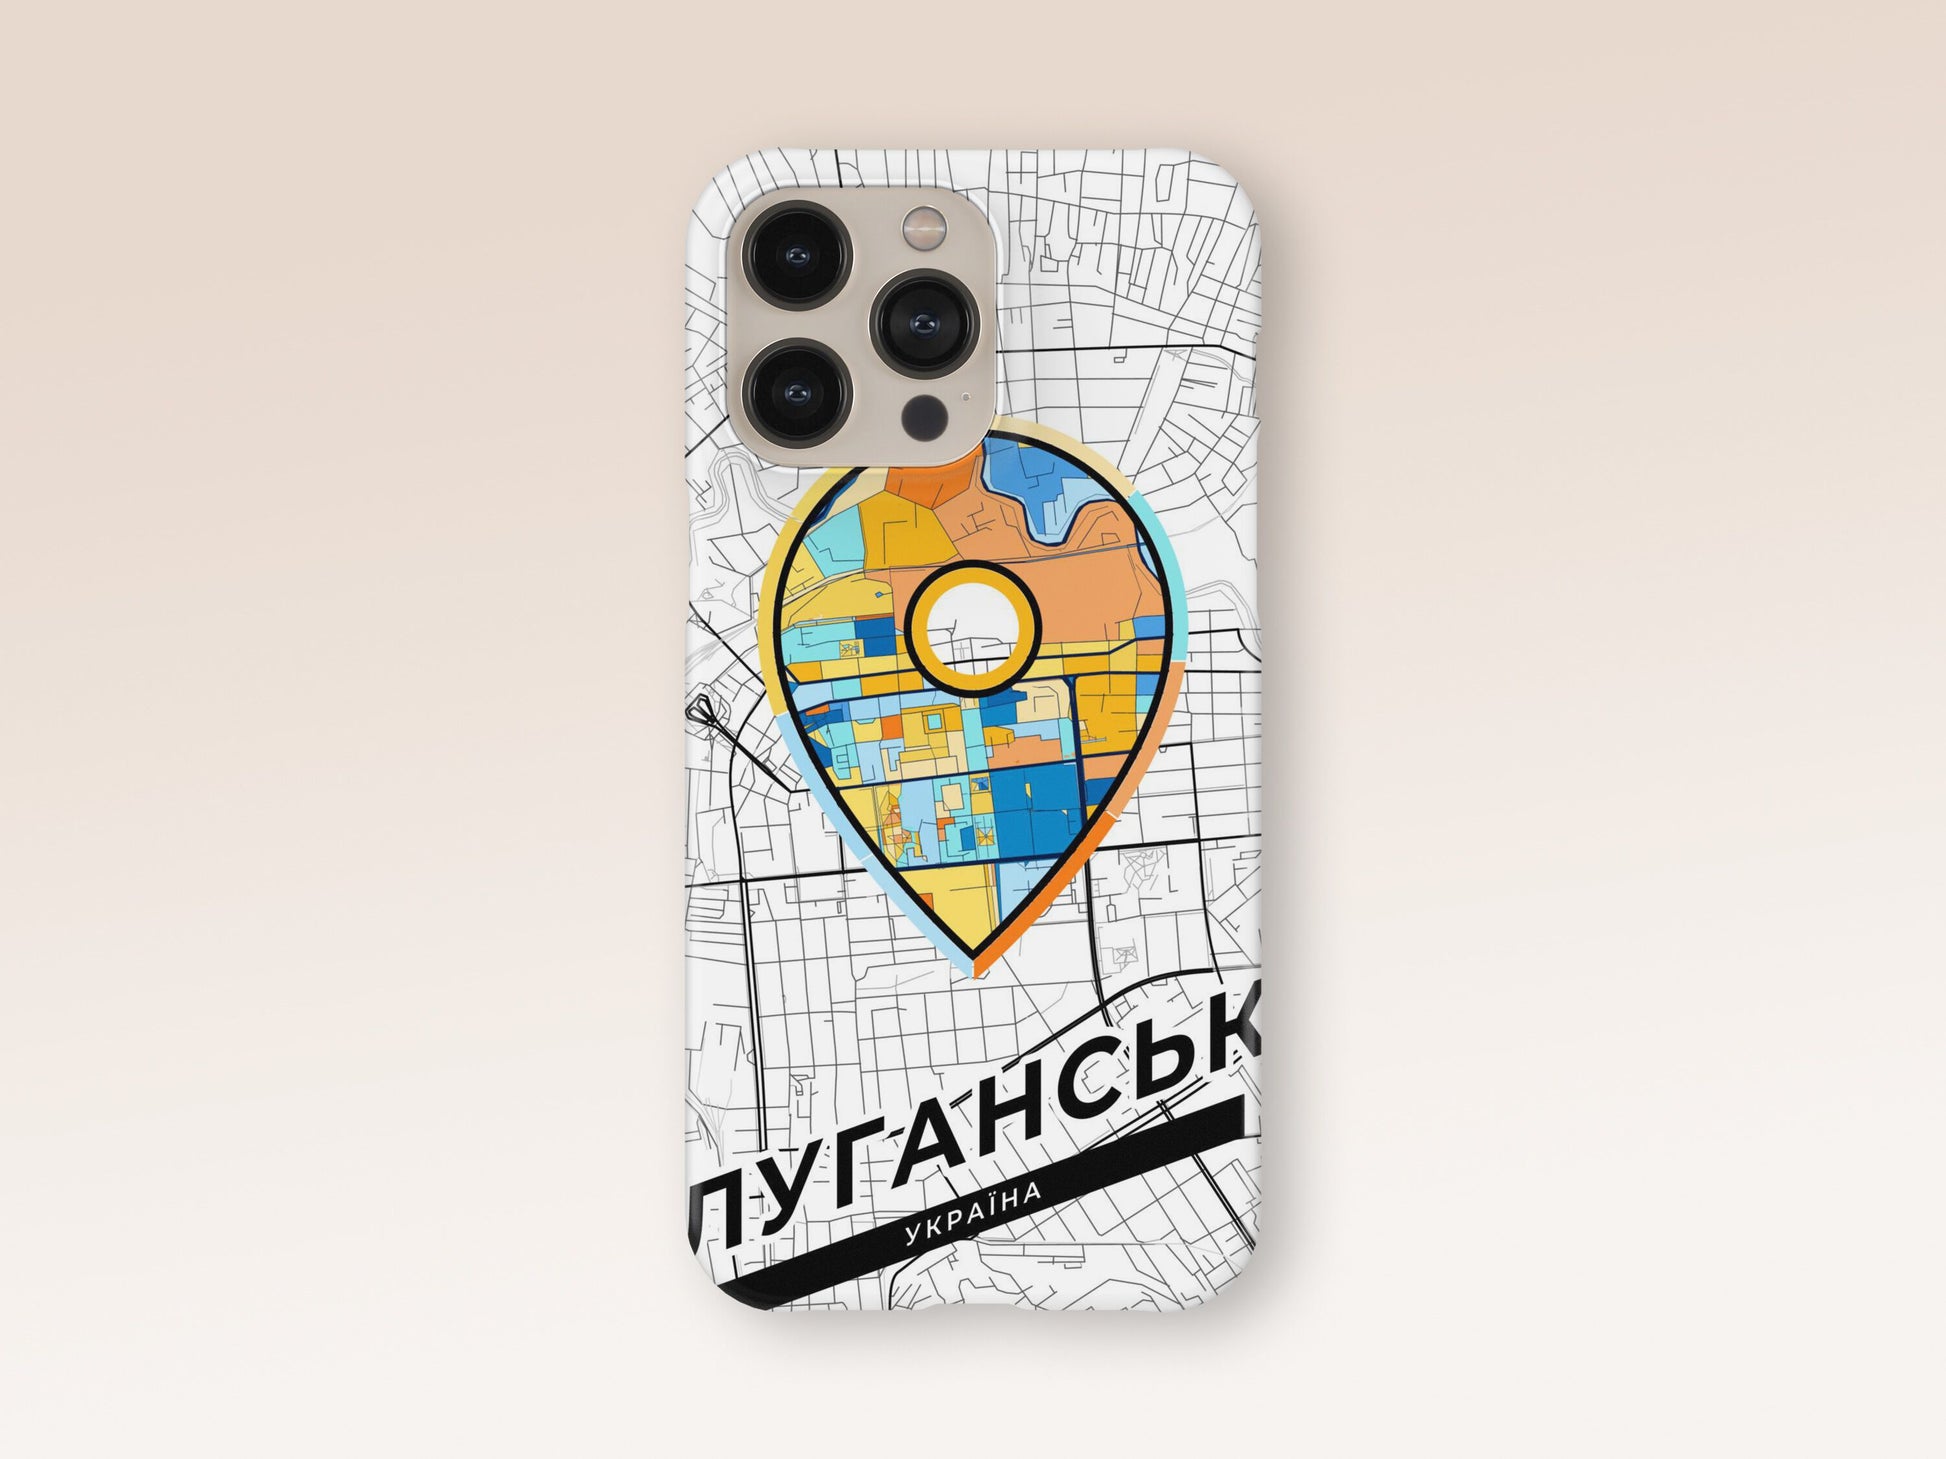 Luhansk Ukraine slim phone case with colorful icon. Birthday, wedding or housewarming gift. Couple match cases. 1